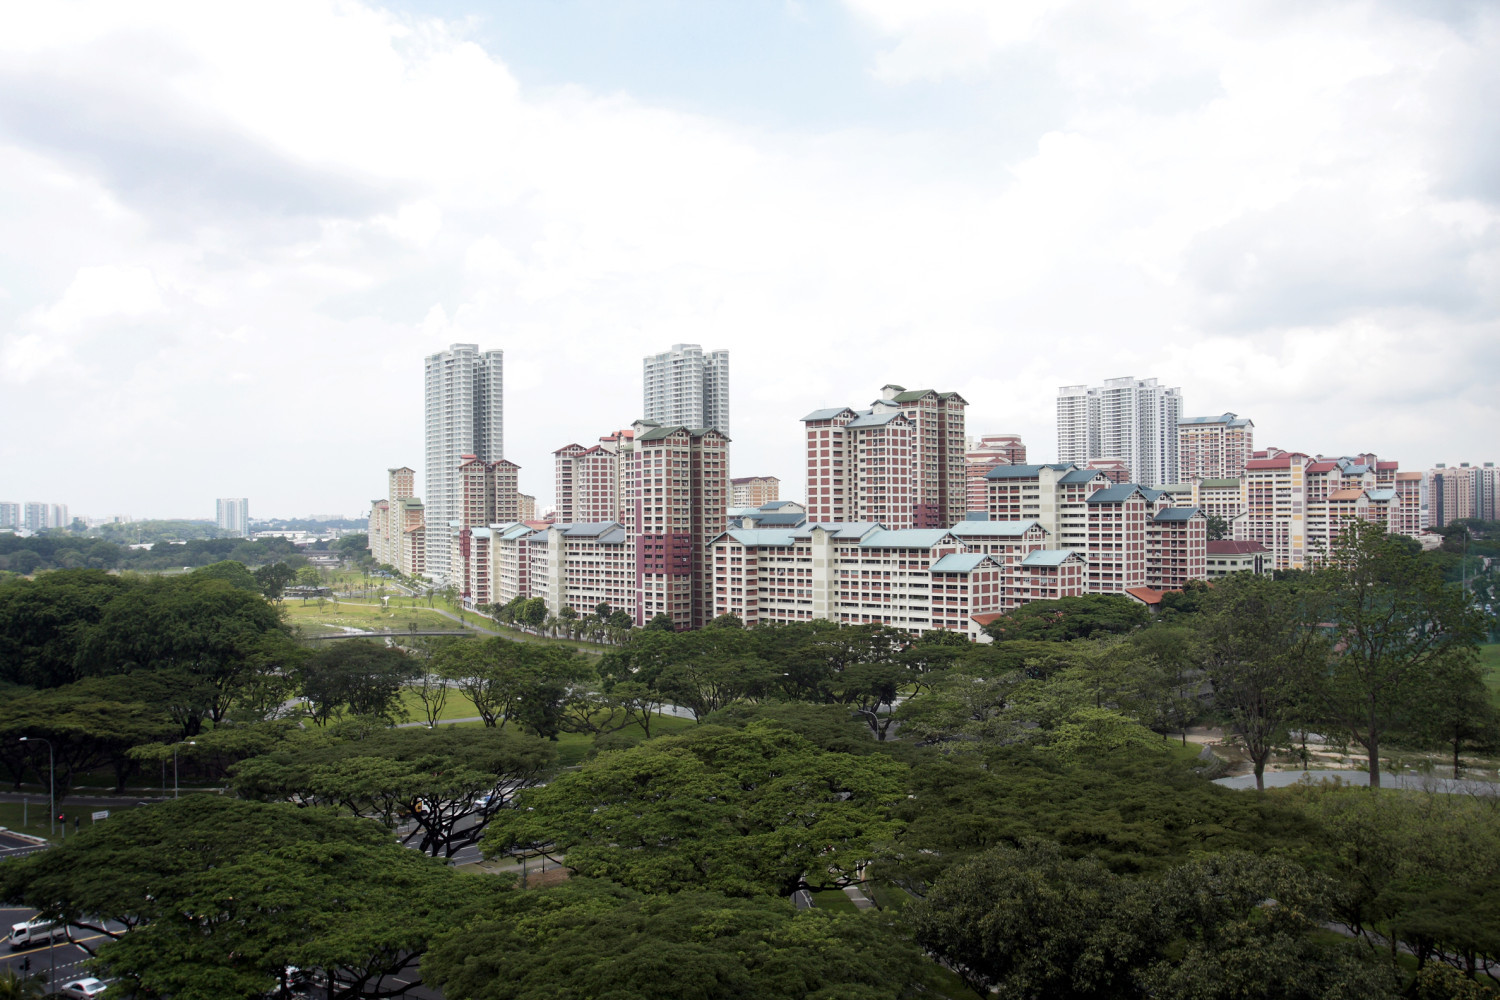 JUST SOLD: Bishan DBSS flat sold for $1.04 million - Property News